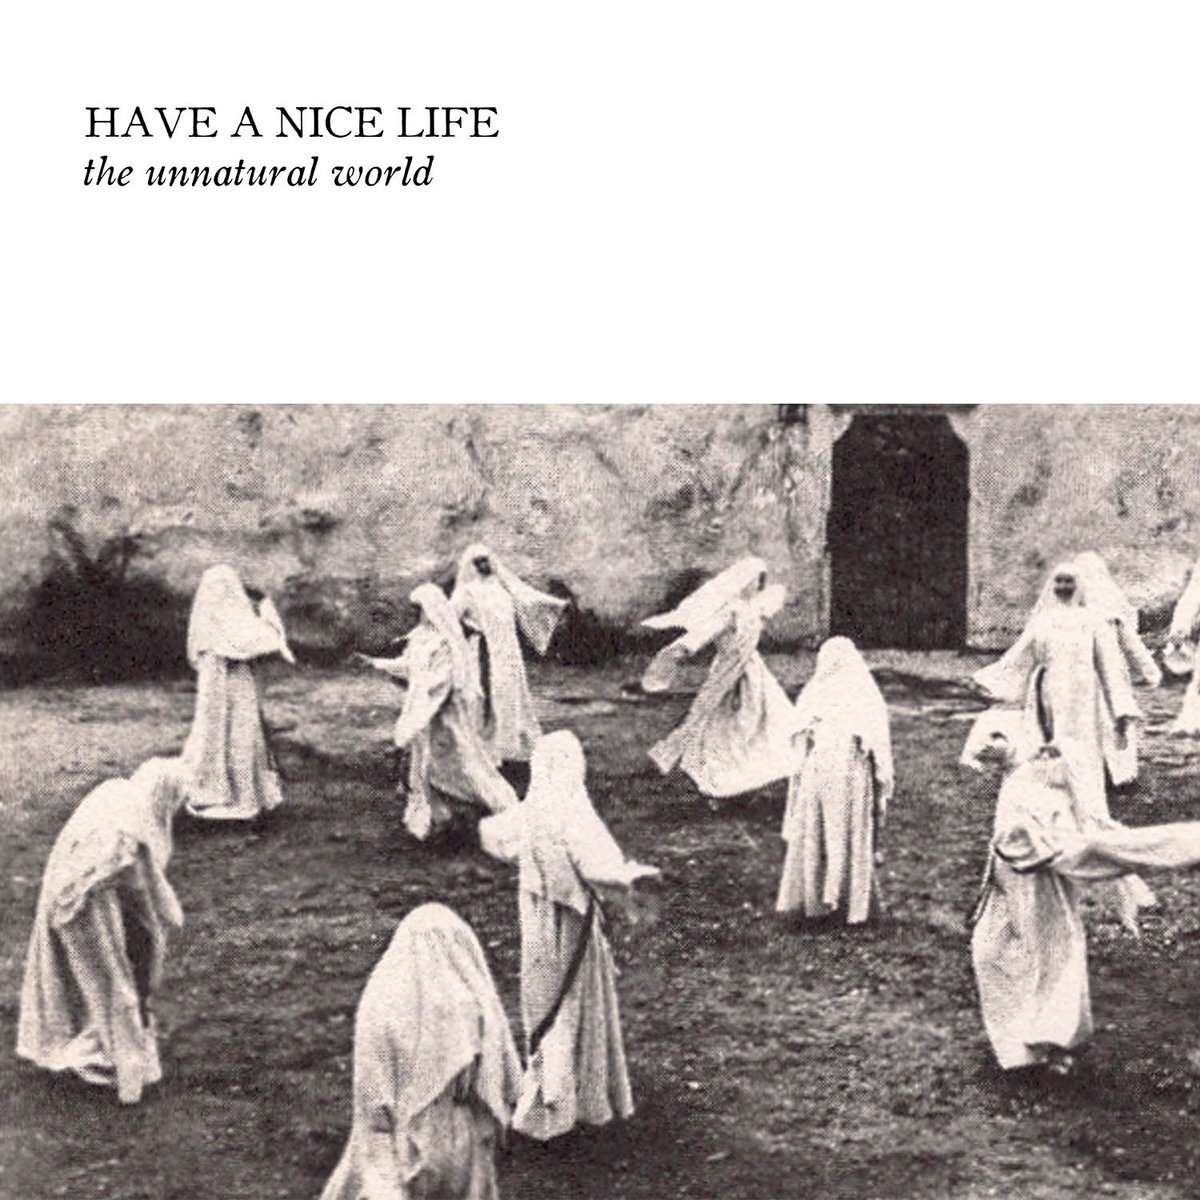 The Unnatural World - HAVE A NICE LIFE